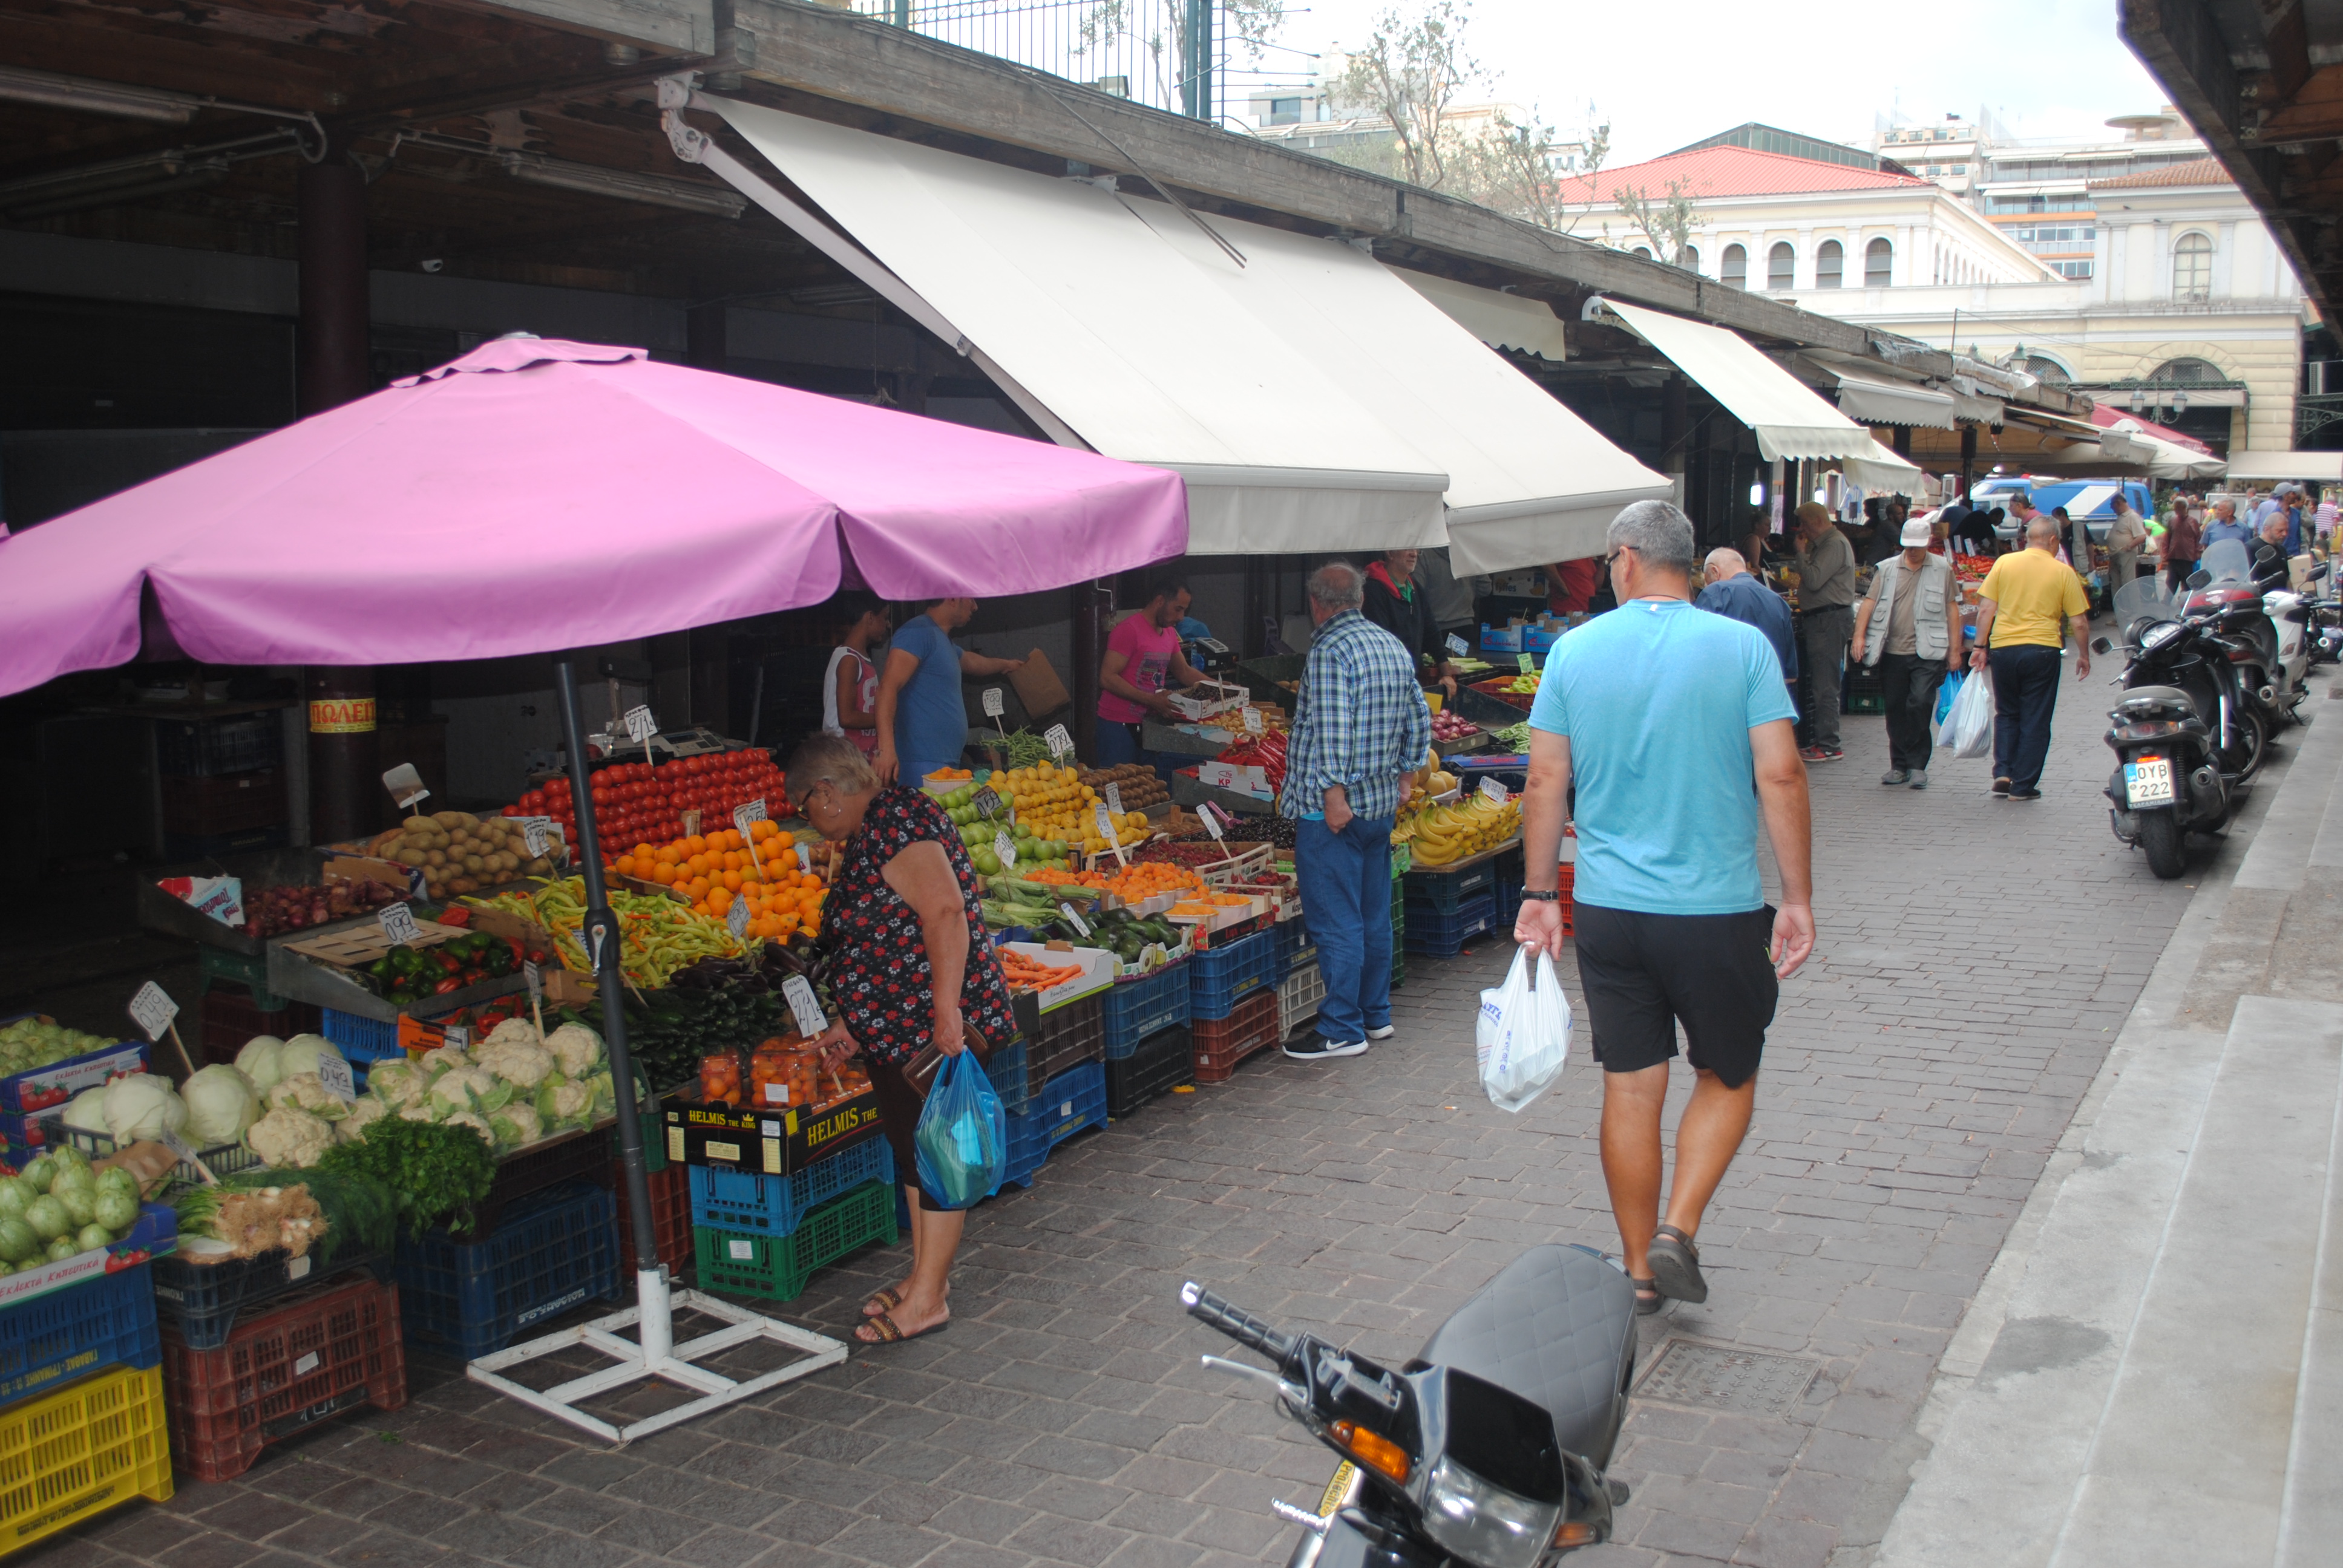 Browsing the street markets in Athens, Greece